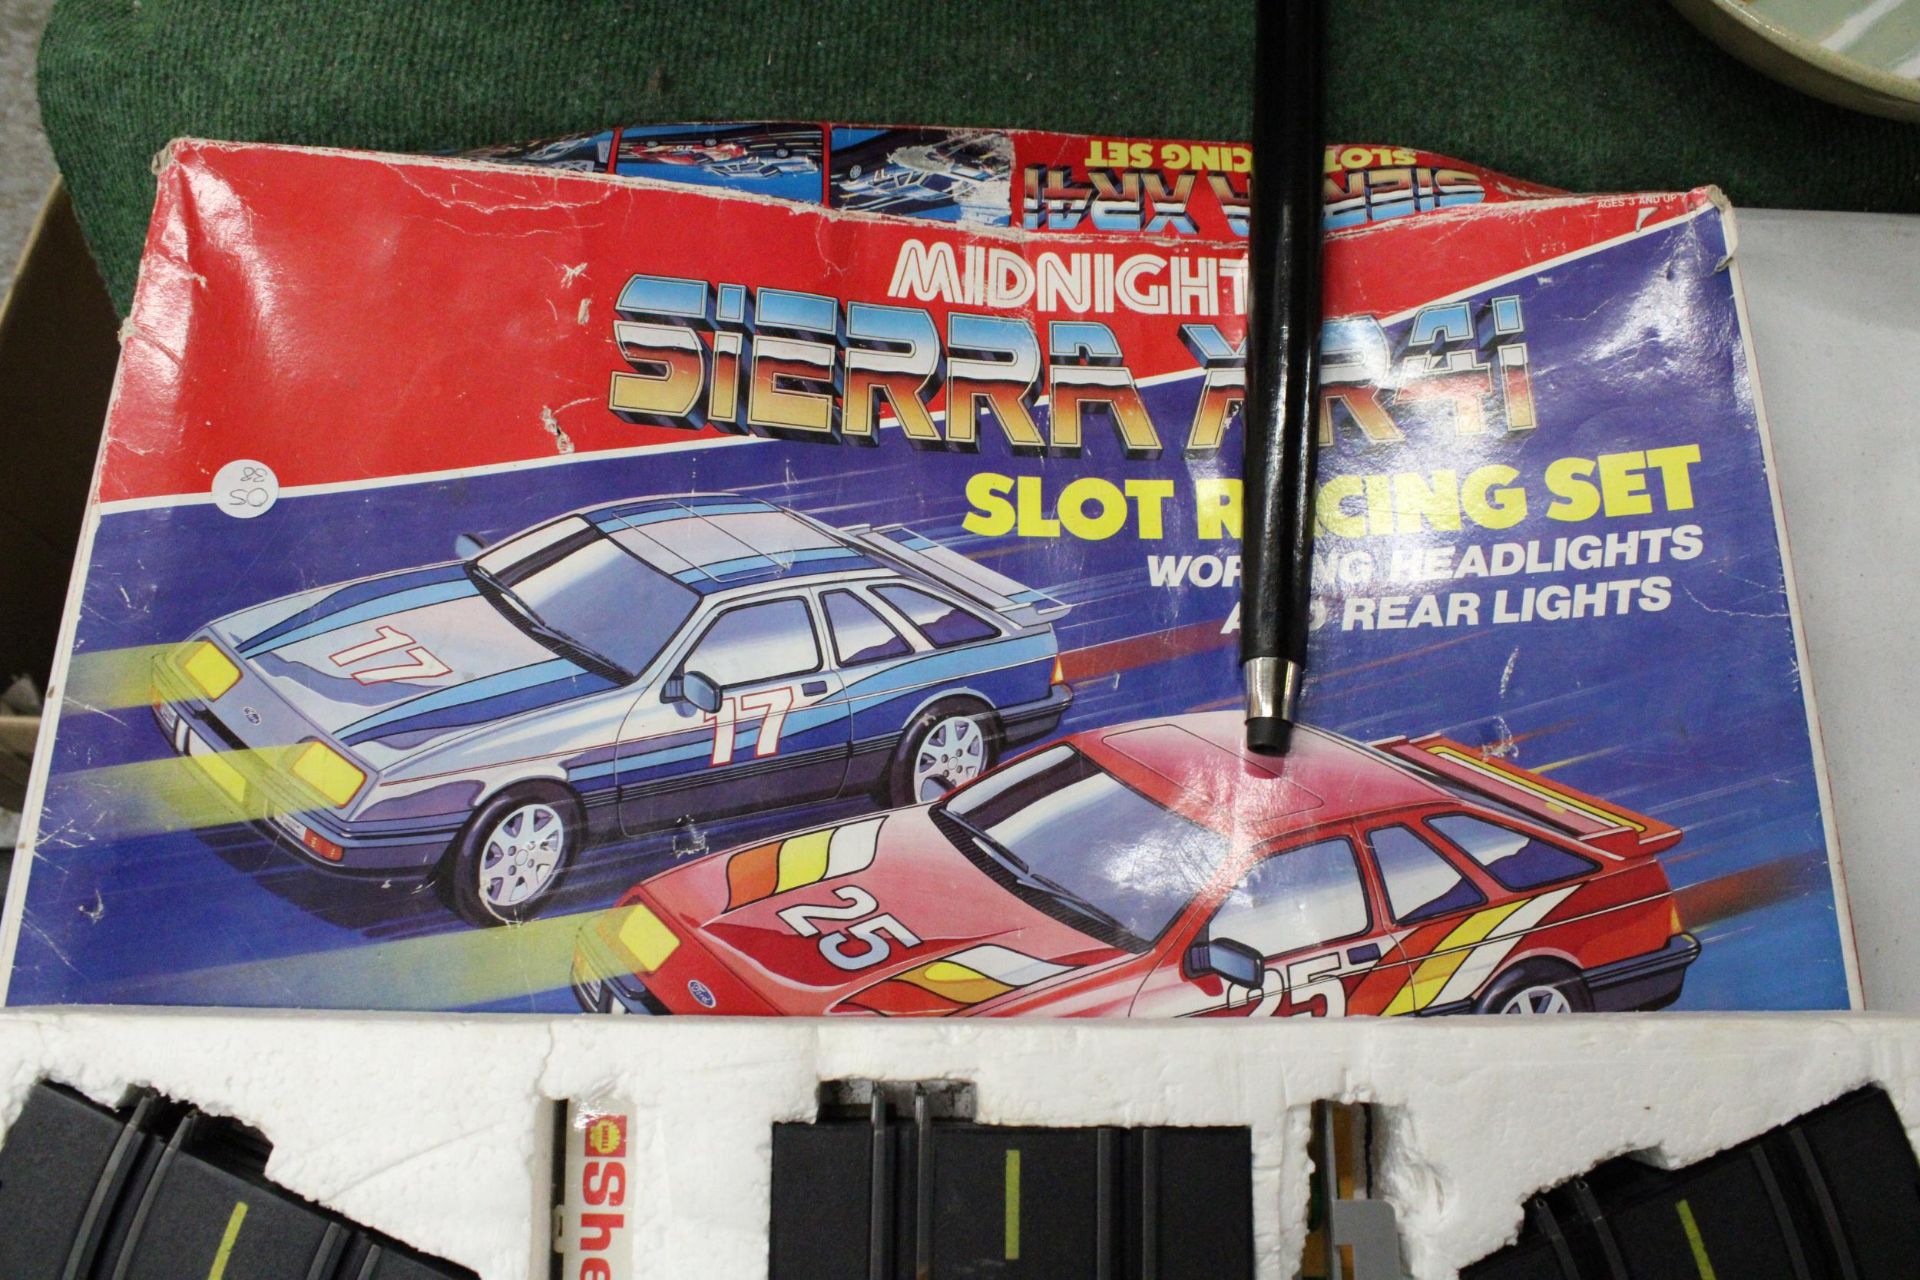 A SIERRA XR4i, RACING GAME WITH ILLUMINATED LIGHTS, BOXED, VENDOR STATES FULL SET, NO WARRANTY GIVEN - Image 3 of 6